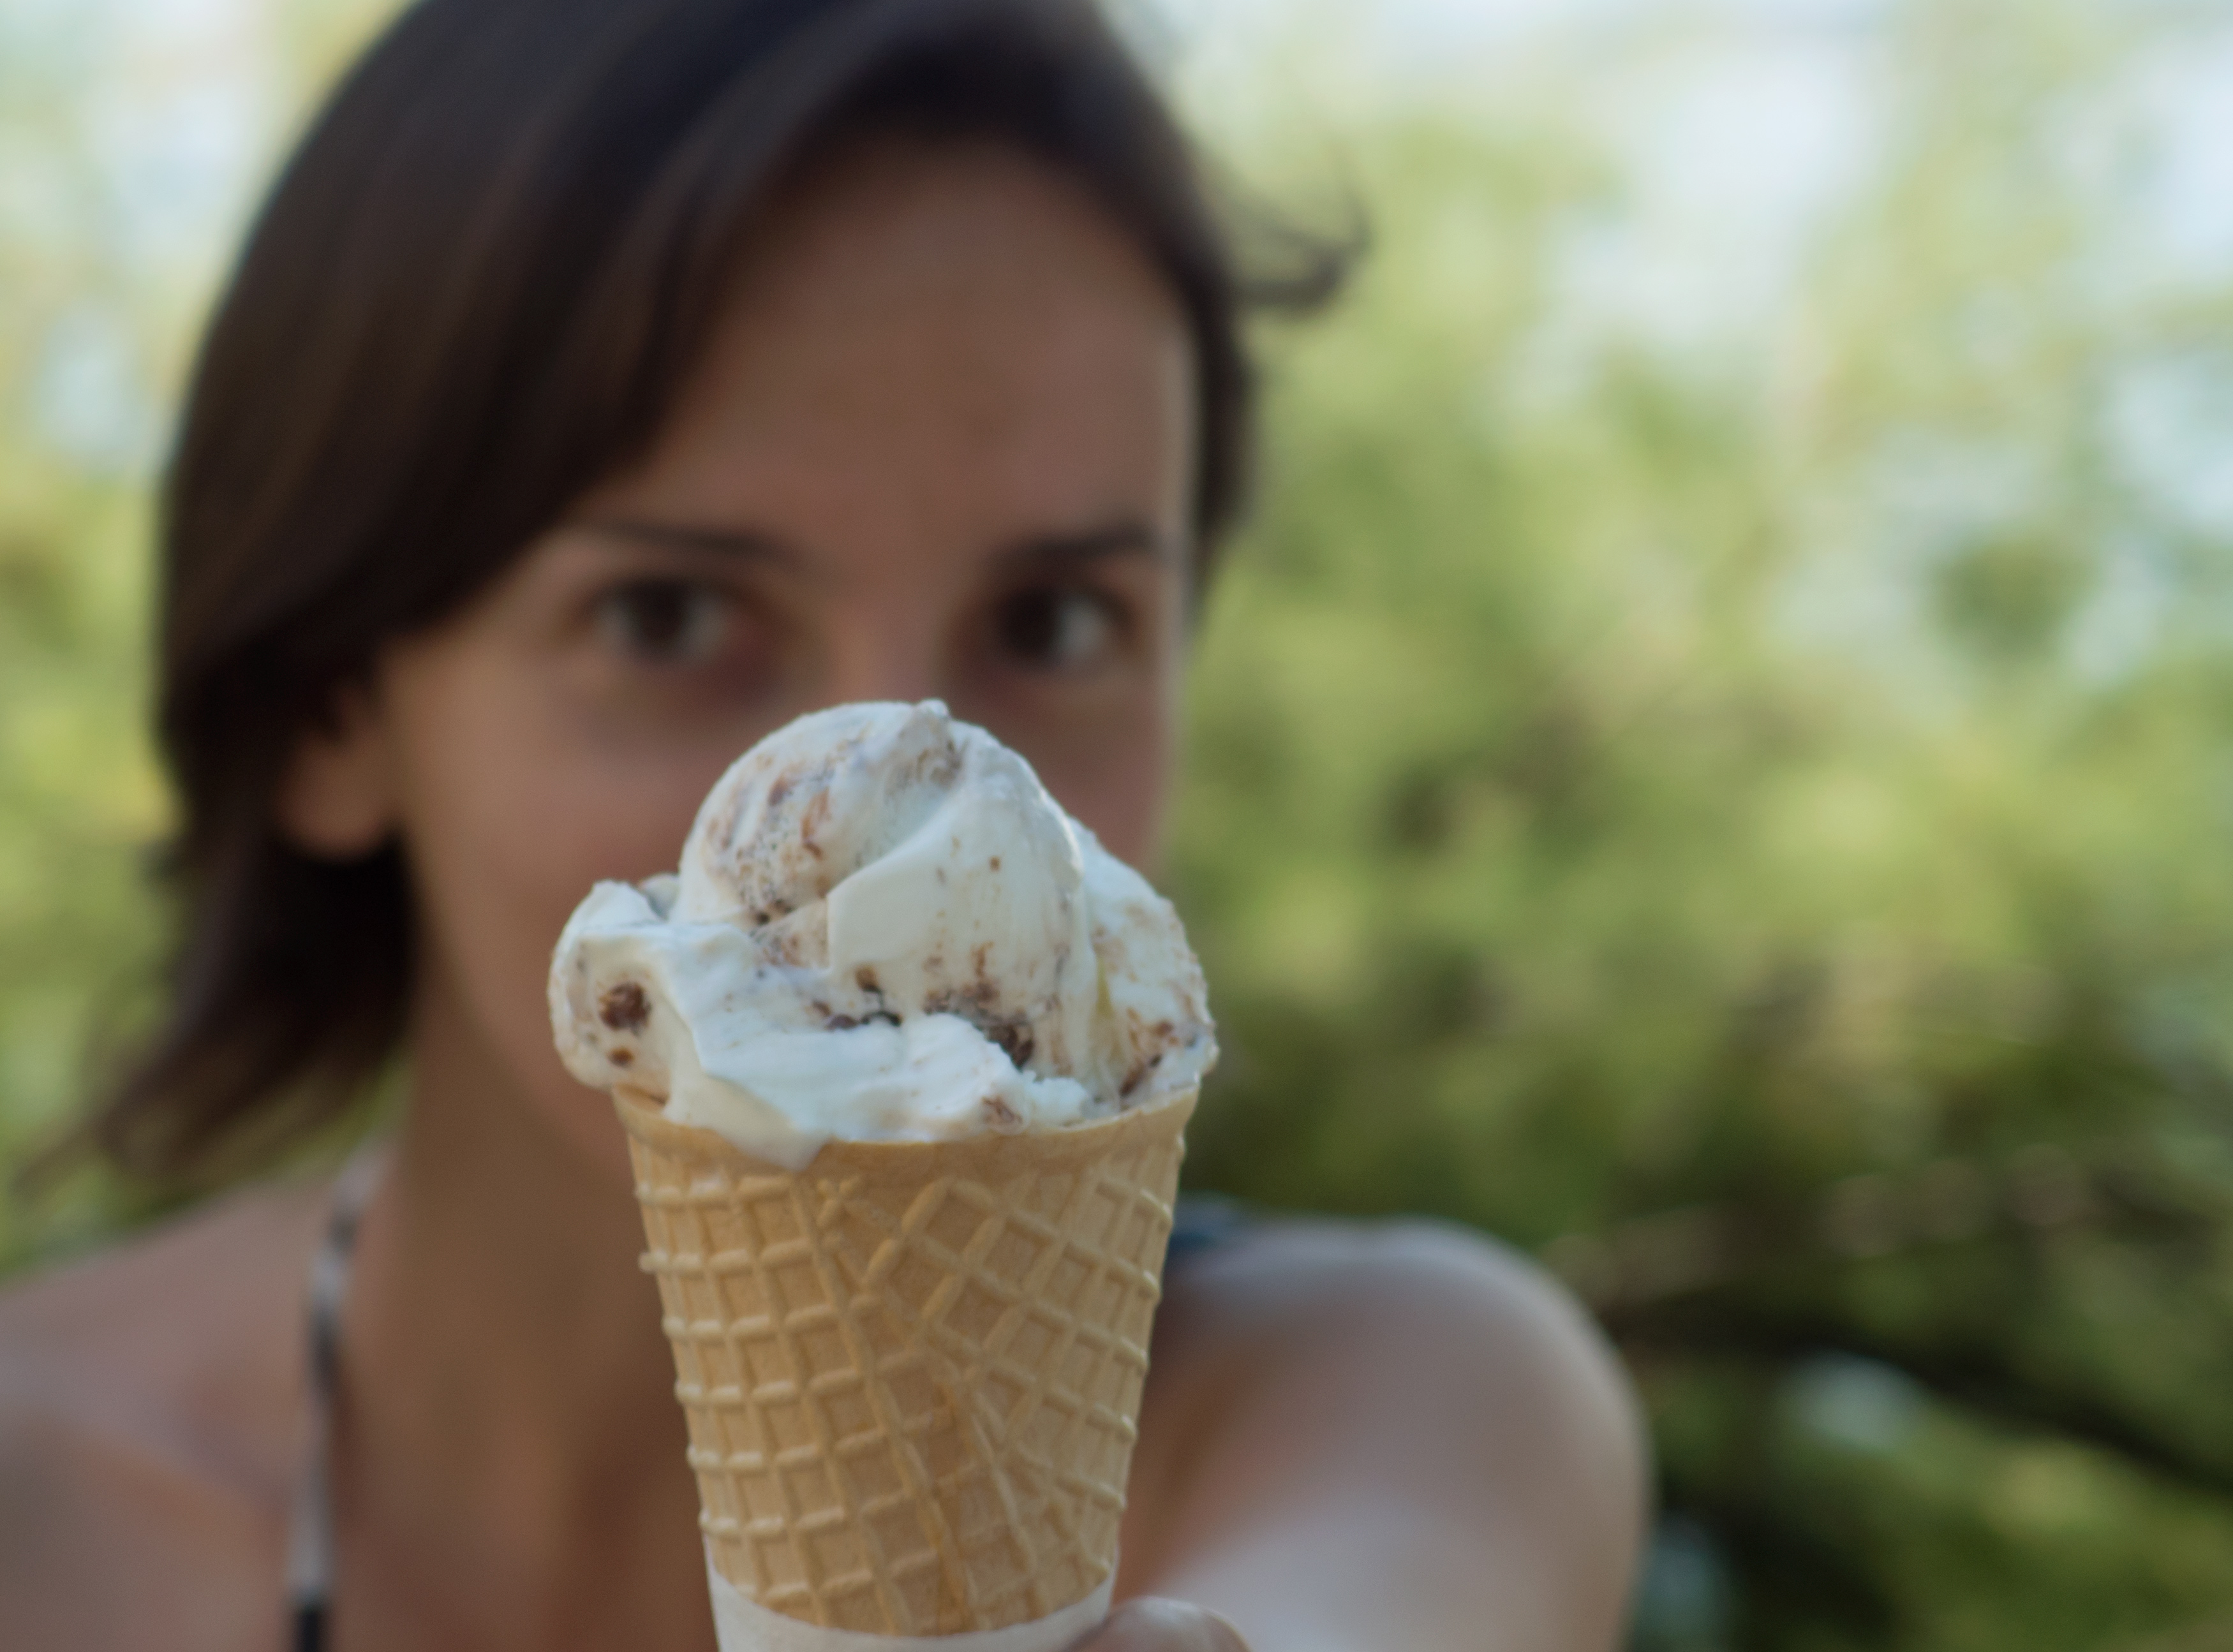 Download full size image of Girl Offering Ice Cream for free. 